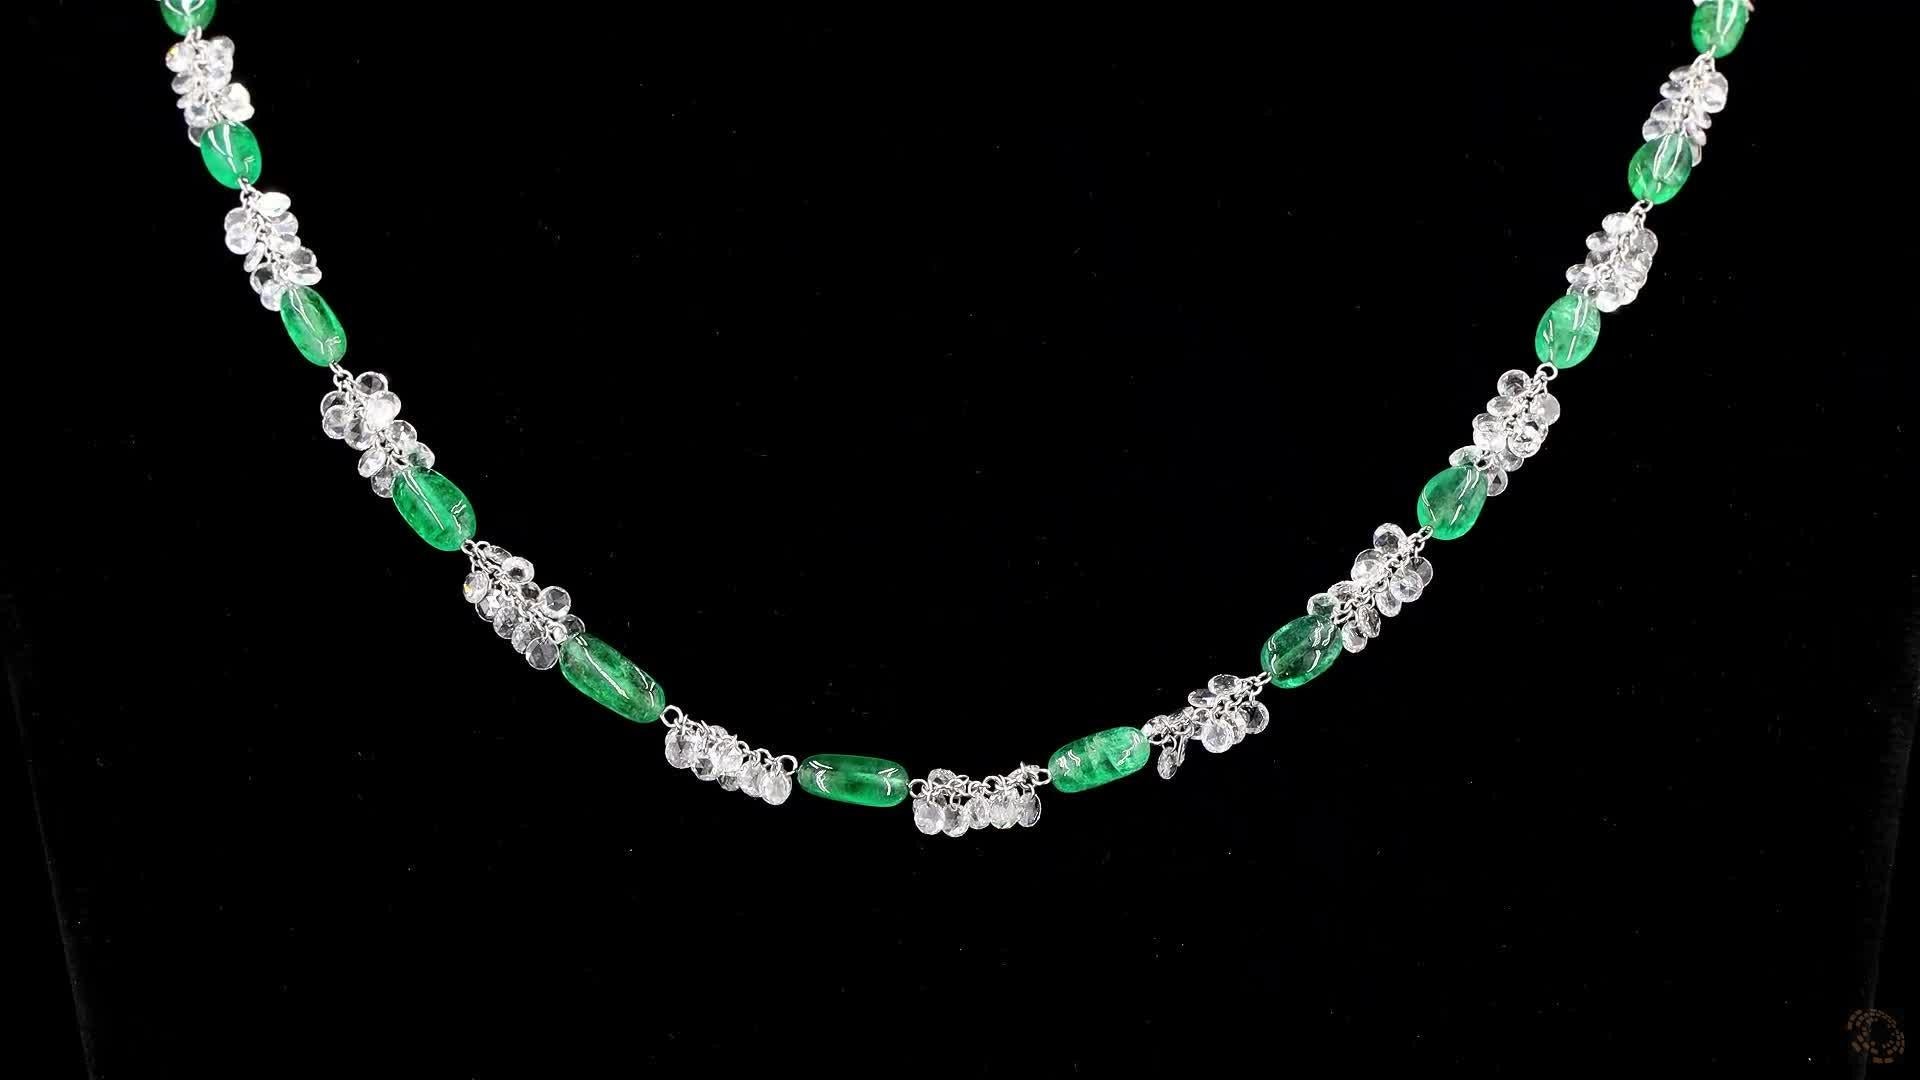 PANIM 18k White Gold 41.39 Carat Diamond Rosecut & Emerald Floral Necklace 

The diamond Rosecut are known for their unique shape and sparkling brilliance. The rosecut is a type of diamond cut that features elongated facets that create a flat shape.